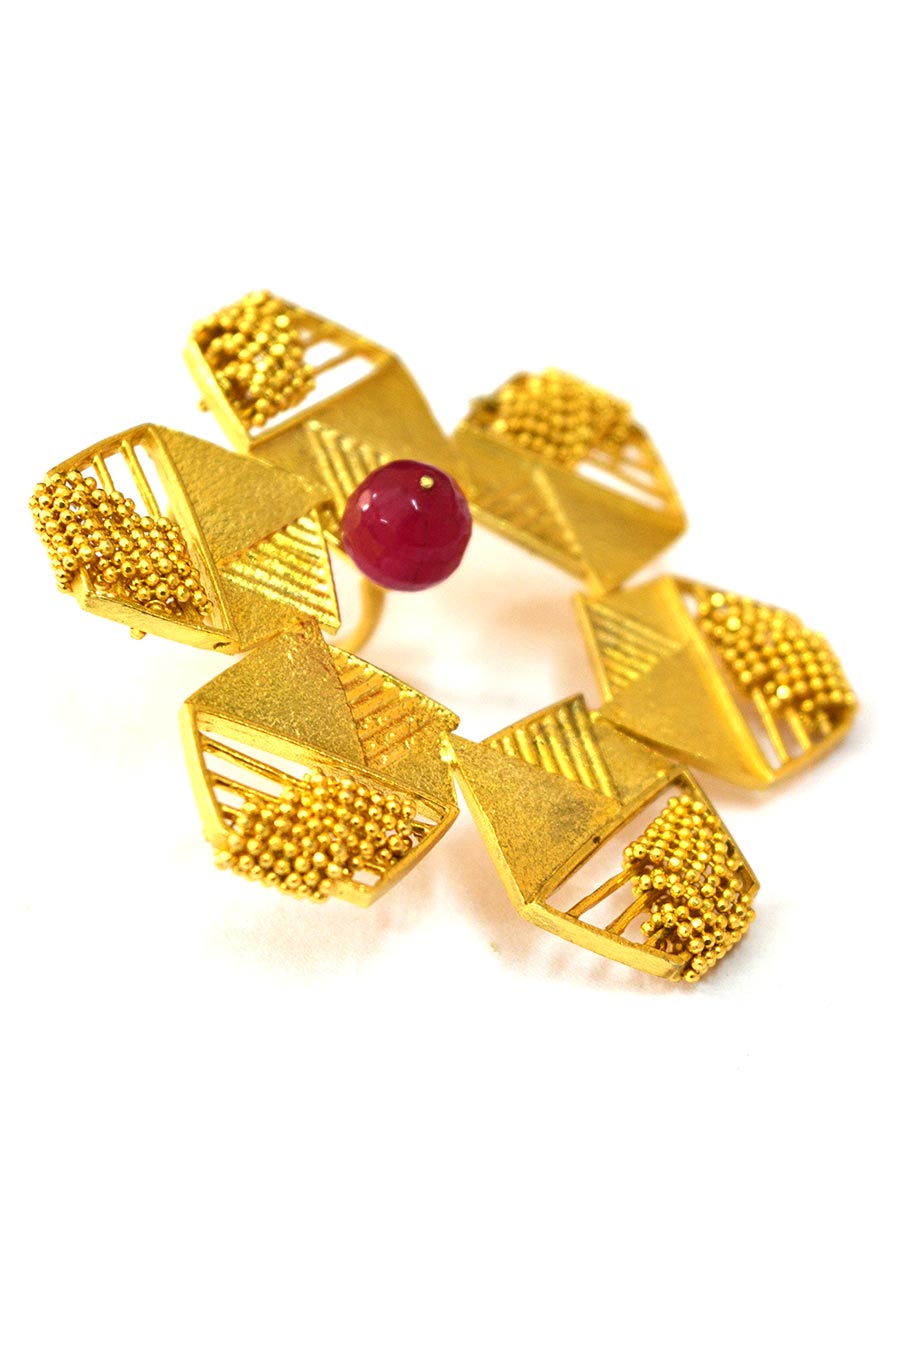 Hexagon Shaped Gold Plated Ring